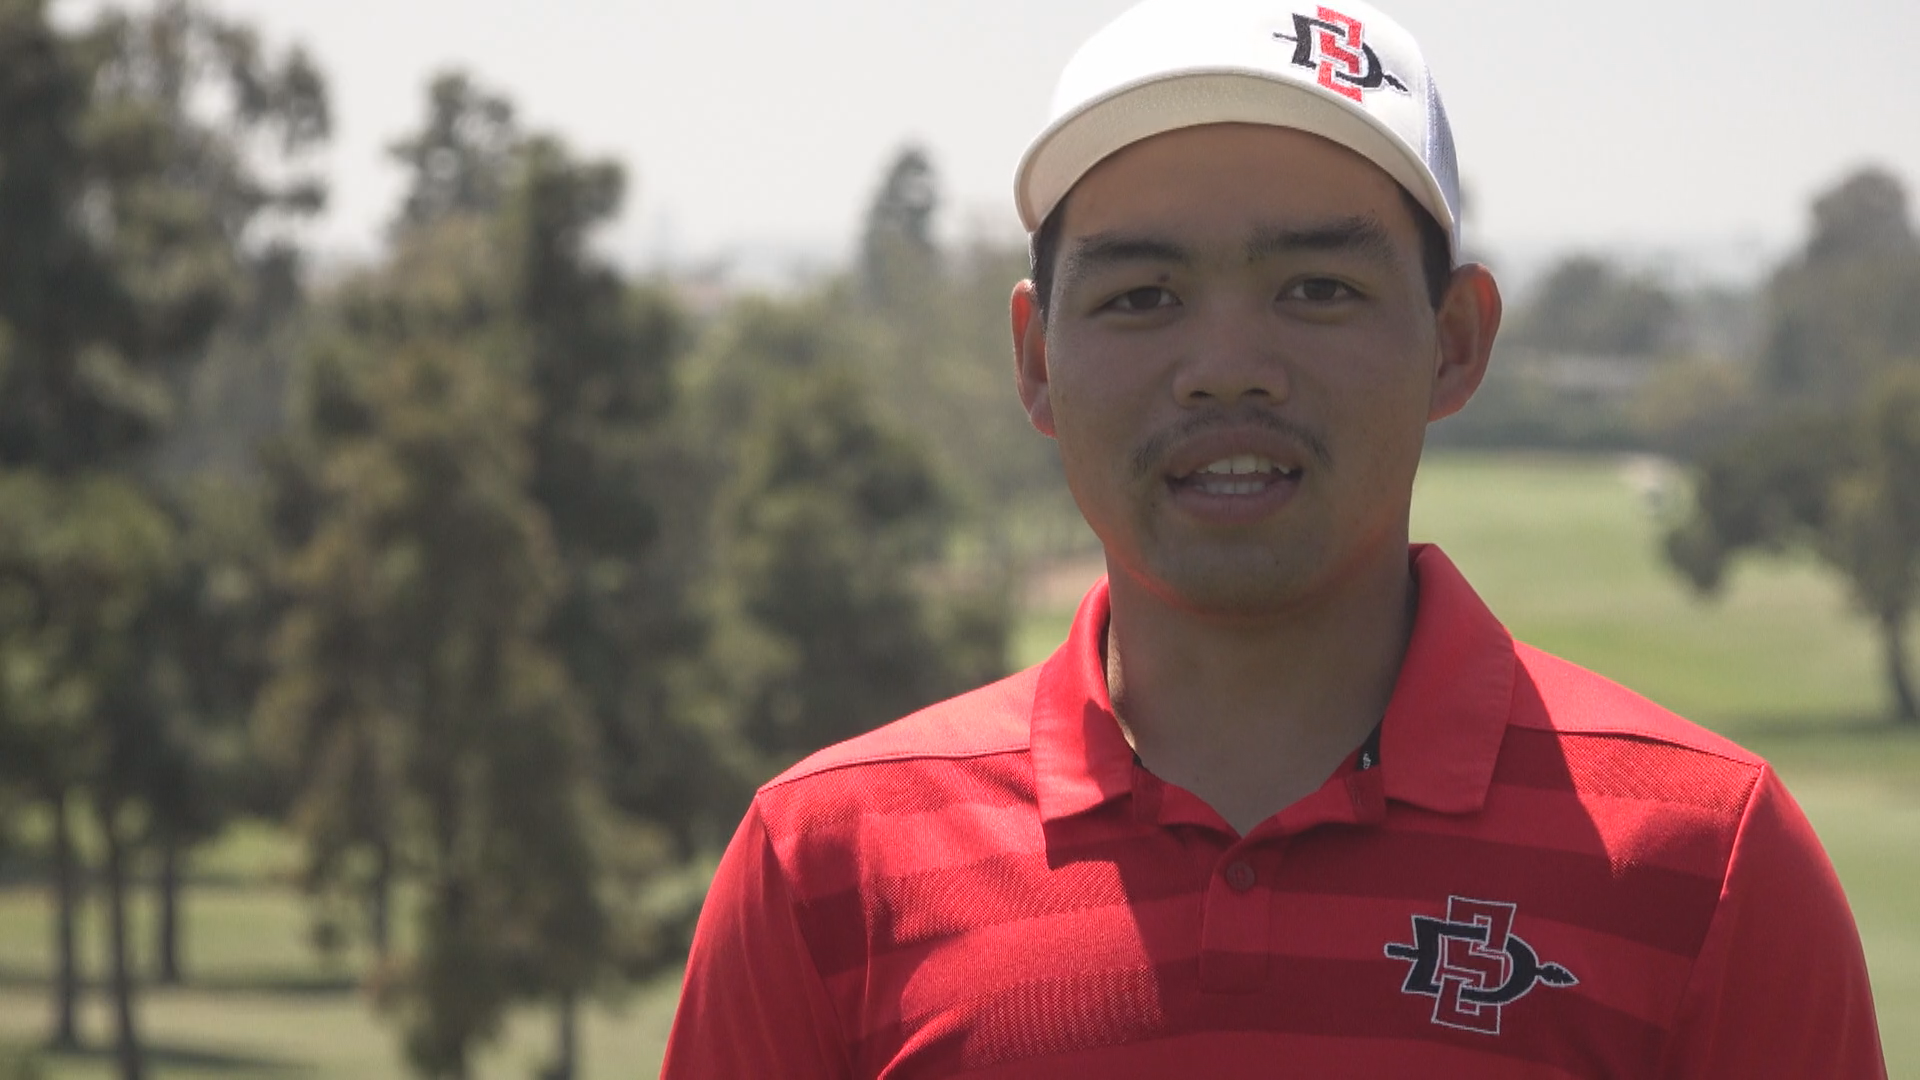 A week after taking home the Mountain West Conference Golf tournament trophy, Anupansuebsai was named to the International Arnold Palmer Cup team for the second time